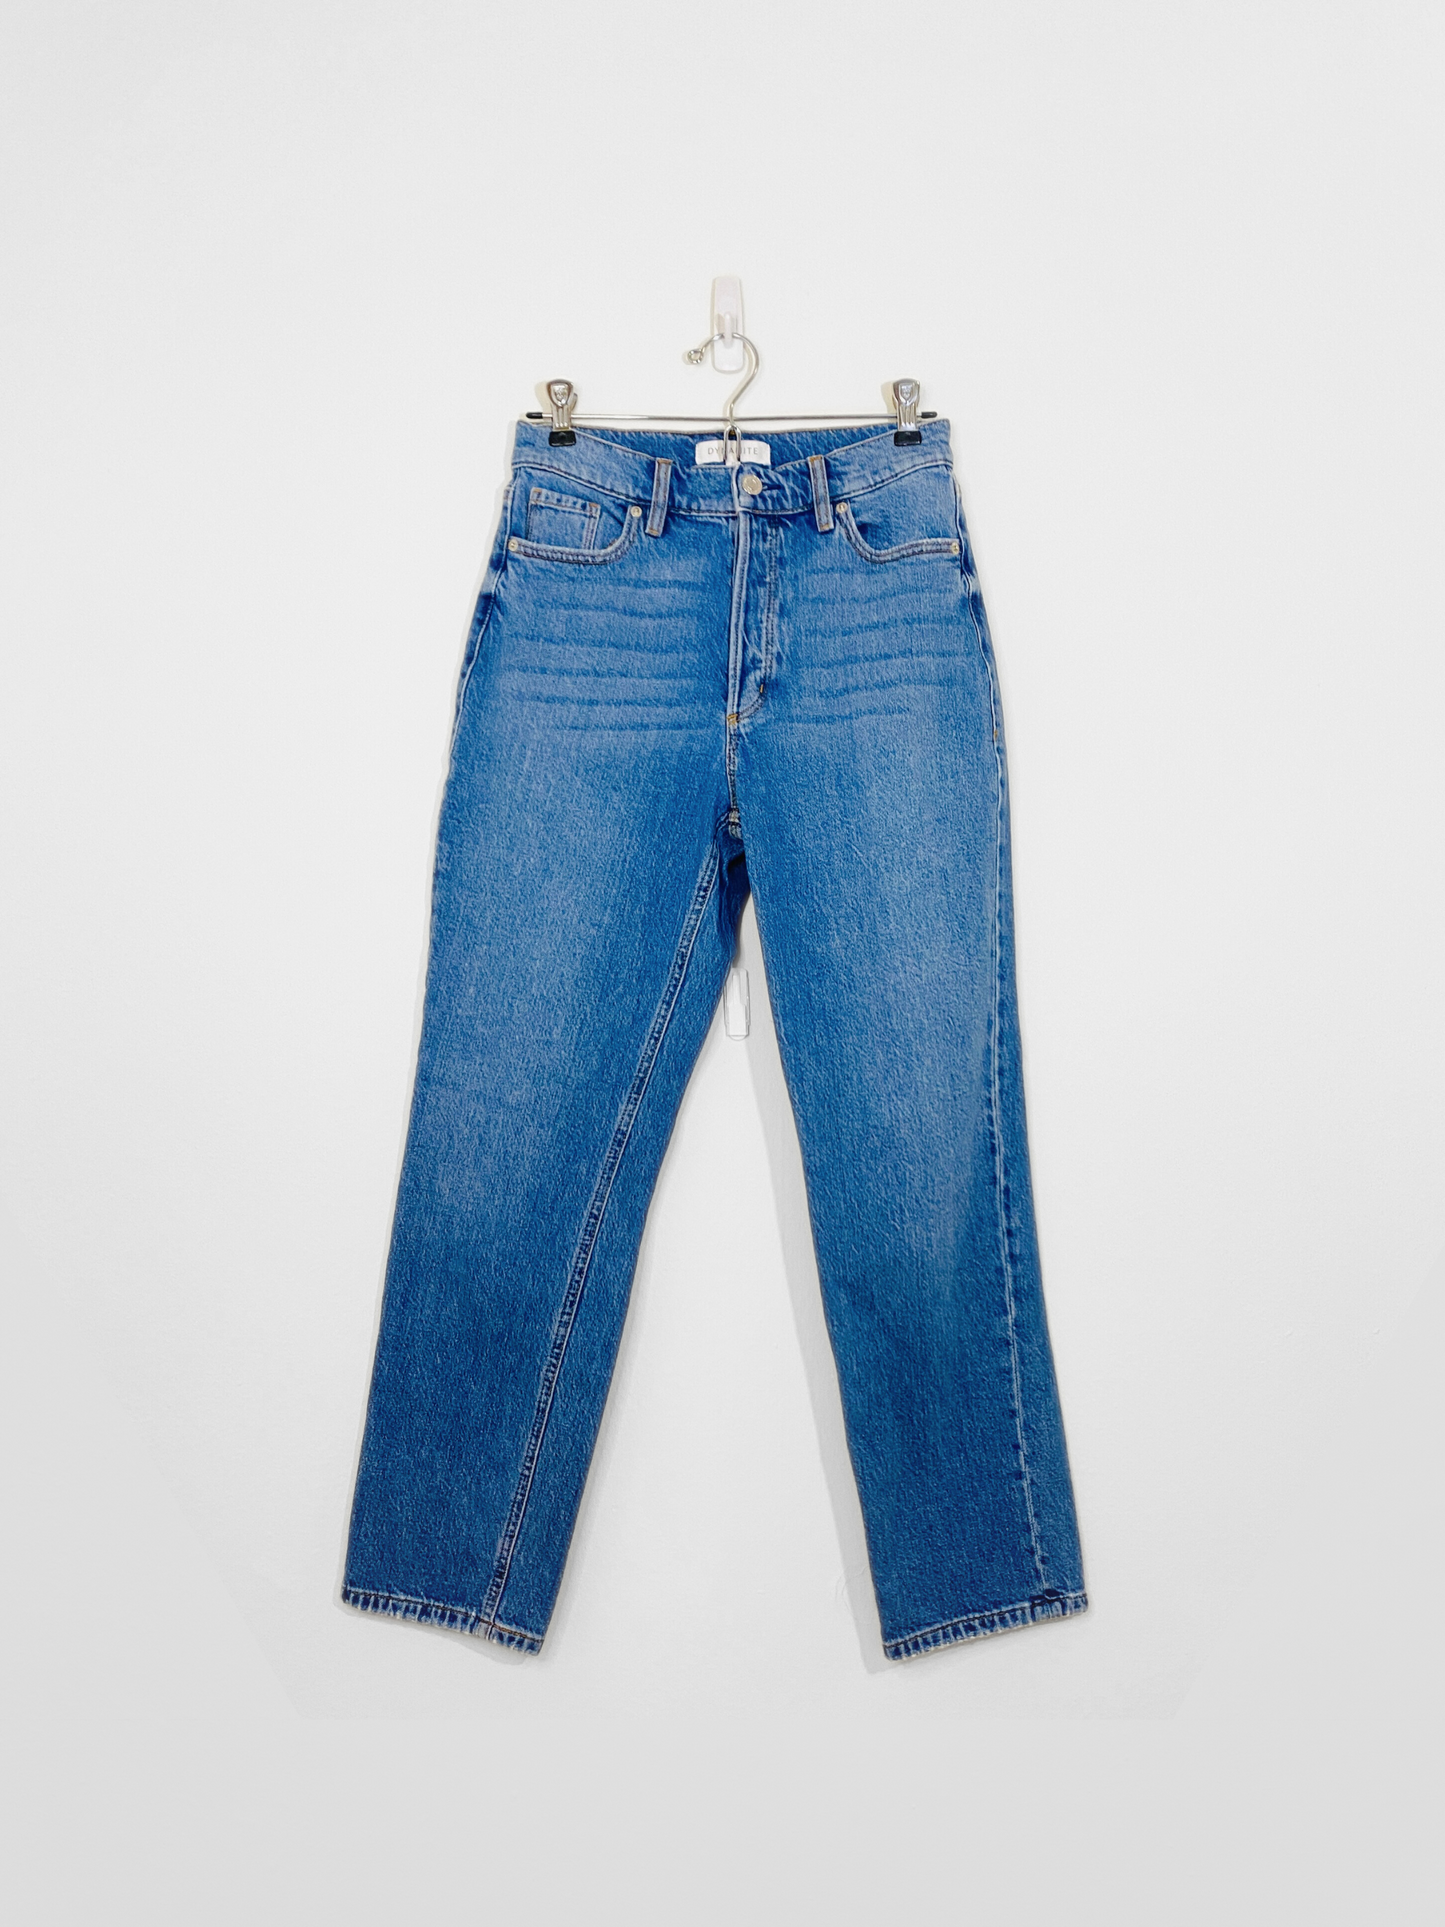 Mom Jeans (Size 27)